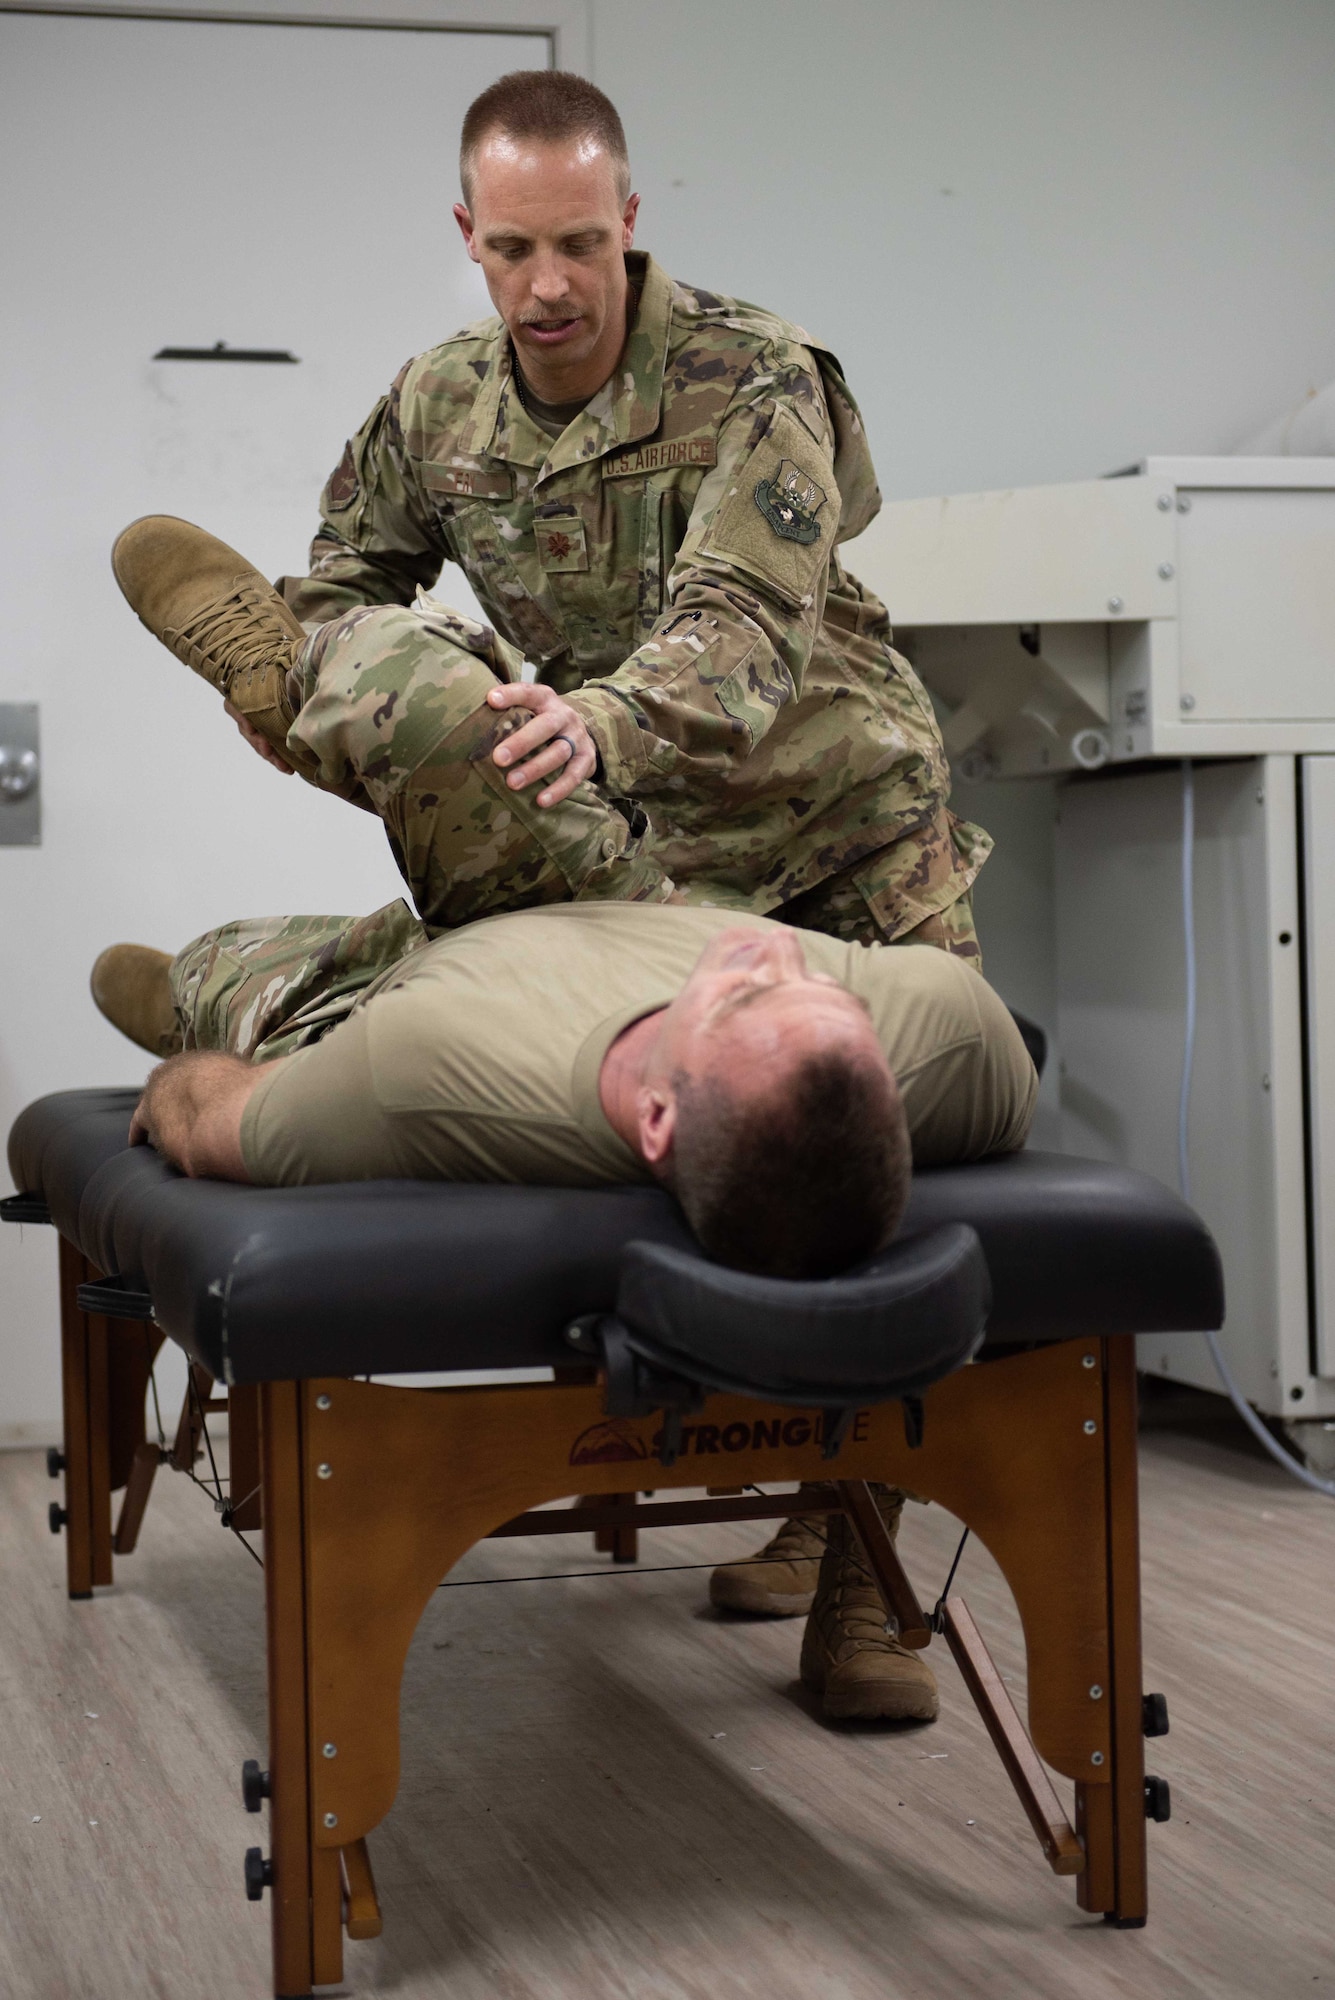 Maj. Adam Frost, 380th Expeditionary Medical Group physical therapist, uses joint manipulation on a patient at the beginning of a treatment May 17, 2019 at Al Dhafra Air Base, United Arab Emirates.     
Fry involves dry needling, a form of acupuncture, and cupping into his treatments – he has found both to be extremely effective at targeting trigger points, releasing muscle spasms and alleviating pain. (U.S. Air Force photo by Staff Sgt. Chris Thornbury)